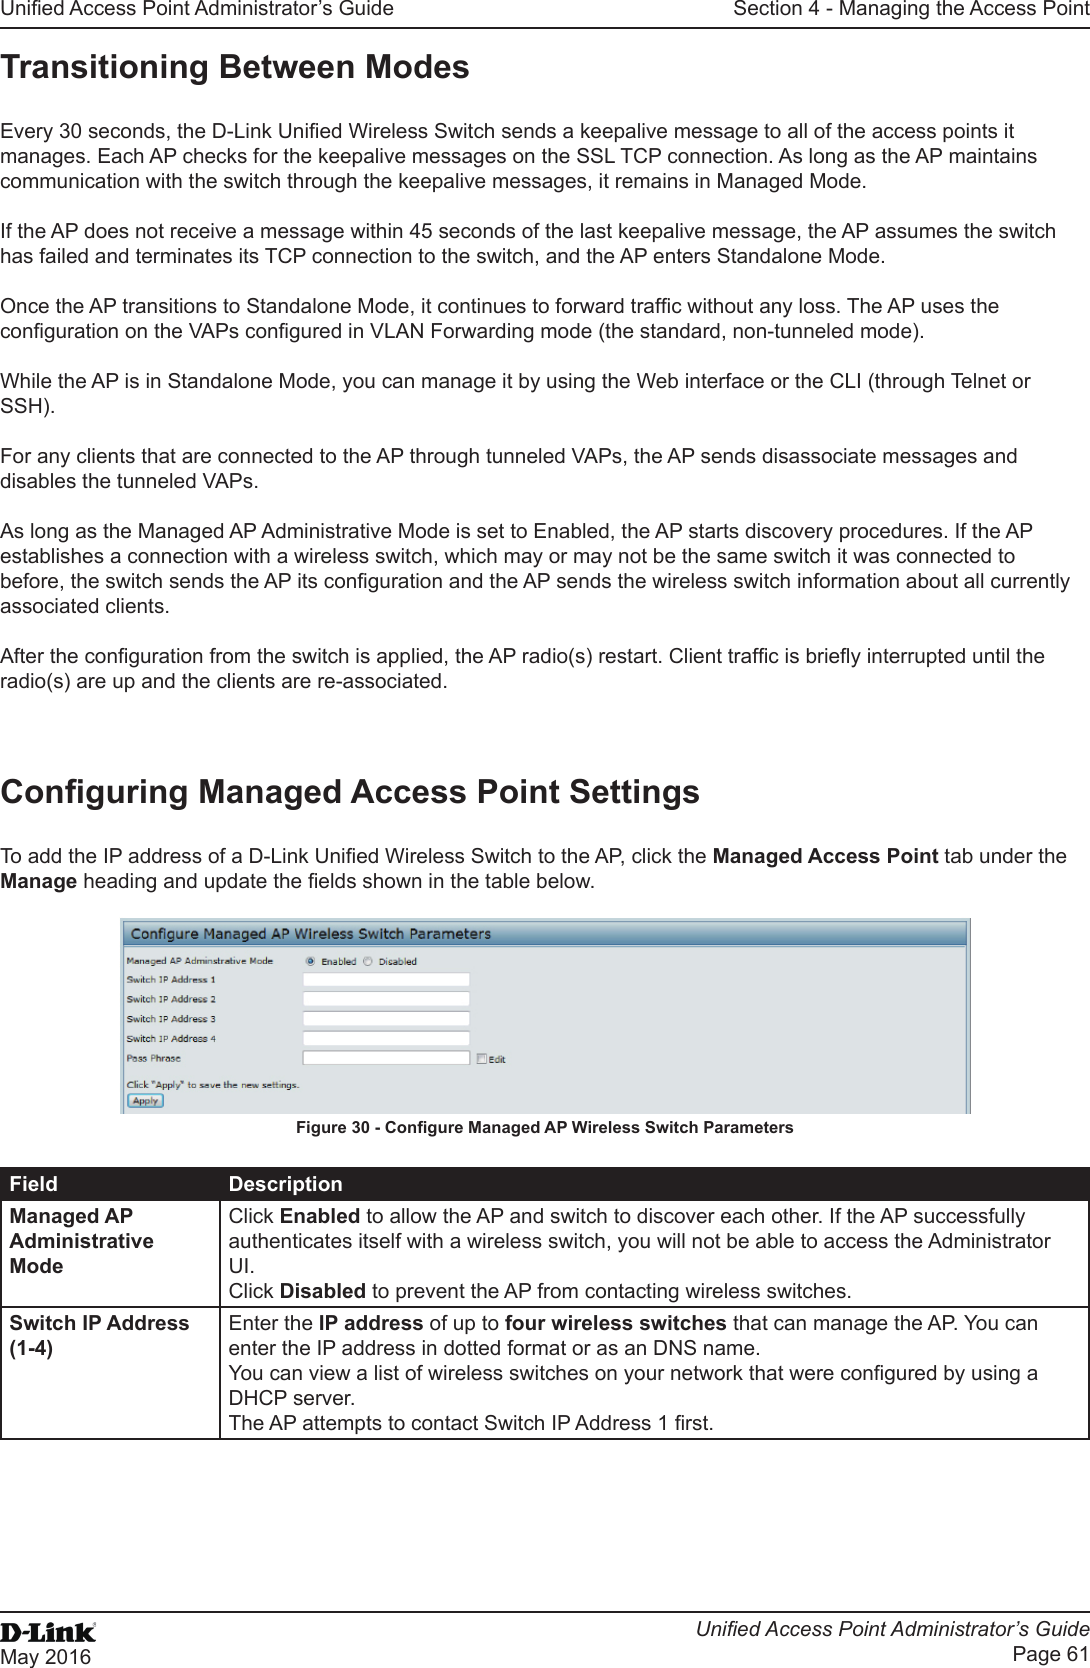 Unied Access Point Administrator’s GuideUnied Access Point Administrator’s GuidePage 61May 2016Section 4 - Managing the Access PointTransitioning Between ModesEvery 30 seconds, the D-Link Unied Wireless Switch sends a keepalive message to all of the access points it manages. Each AP checks for the keepalive messages on the SSL TCP connection. As long as the AP maintains communication with the switch through the keepalive messages, it remains in Managed Mode.If the AP does not receive a message within 45 seconds of the last keepalive message, the AP assumes the switch has failed and terminates its TCP connection to the switch, and the AP enters Standalone Mode.Once the AP transitions to Standalone Mode, it continues to forward trafc without any loss. The AP uses the conguration on the VAPs congured in VLAN Forwarding mode (the standard, non-tunneled mode).While the AP is in Standalone Mode, you can manage it by using the Web interface or the CLI (through Telnet or SSH).For any clients that are connected to the AP through tunneled VAPs, the AP sends disassociate messages and disables the tunneled VAPs.As long as the Managed AP Administrative Mode is set to Enabled, the AP starts discovery procedures. If the AP establishes a connection with a wireless switch, which may or may not be the same switch it was connected to before, the switch sends the AP its conguration and the AP sends the wireless switch information about all currently associated clients.After the conguration from the switch is applied, the AP radio(s) restart. Client trafc is briey interrupted until the radio(s) are up and the clients are re-associated.Conguring Managed Access Point SettingsTo add the IP address of a D-Link Unied Wireless Switch to the AP, click the Managed Access Point tab under the Manage heading and update the elds shown in the table below.Figure 30 - Congure Managed AP Wireless Switch ParametersField DescriptionManaged AP Administrative ModeClick Enabled to allow the AP and switch to discover each other. If the AP successfully authenticates itself with a wireless switch, you will not be able to access the Administrator UI. Click Disabled to prevent the AP from contacting wireless switches.Switch IP Address (1-4)Enter the IP address of up to four wireless switches that can manage the AP. You can enter the IP address in dotted format or as an DNS name.You can view a list of wireless switches on your network that were congured by using a DHCP server.The AP attempts to contact Switch IP Address 1 rst.